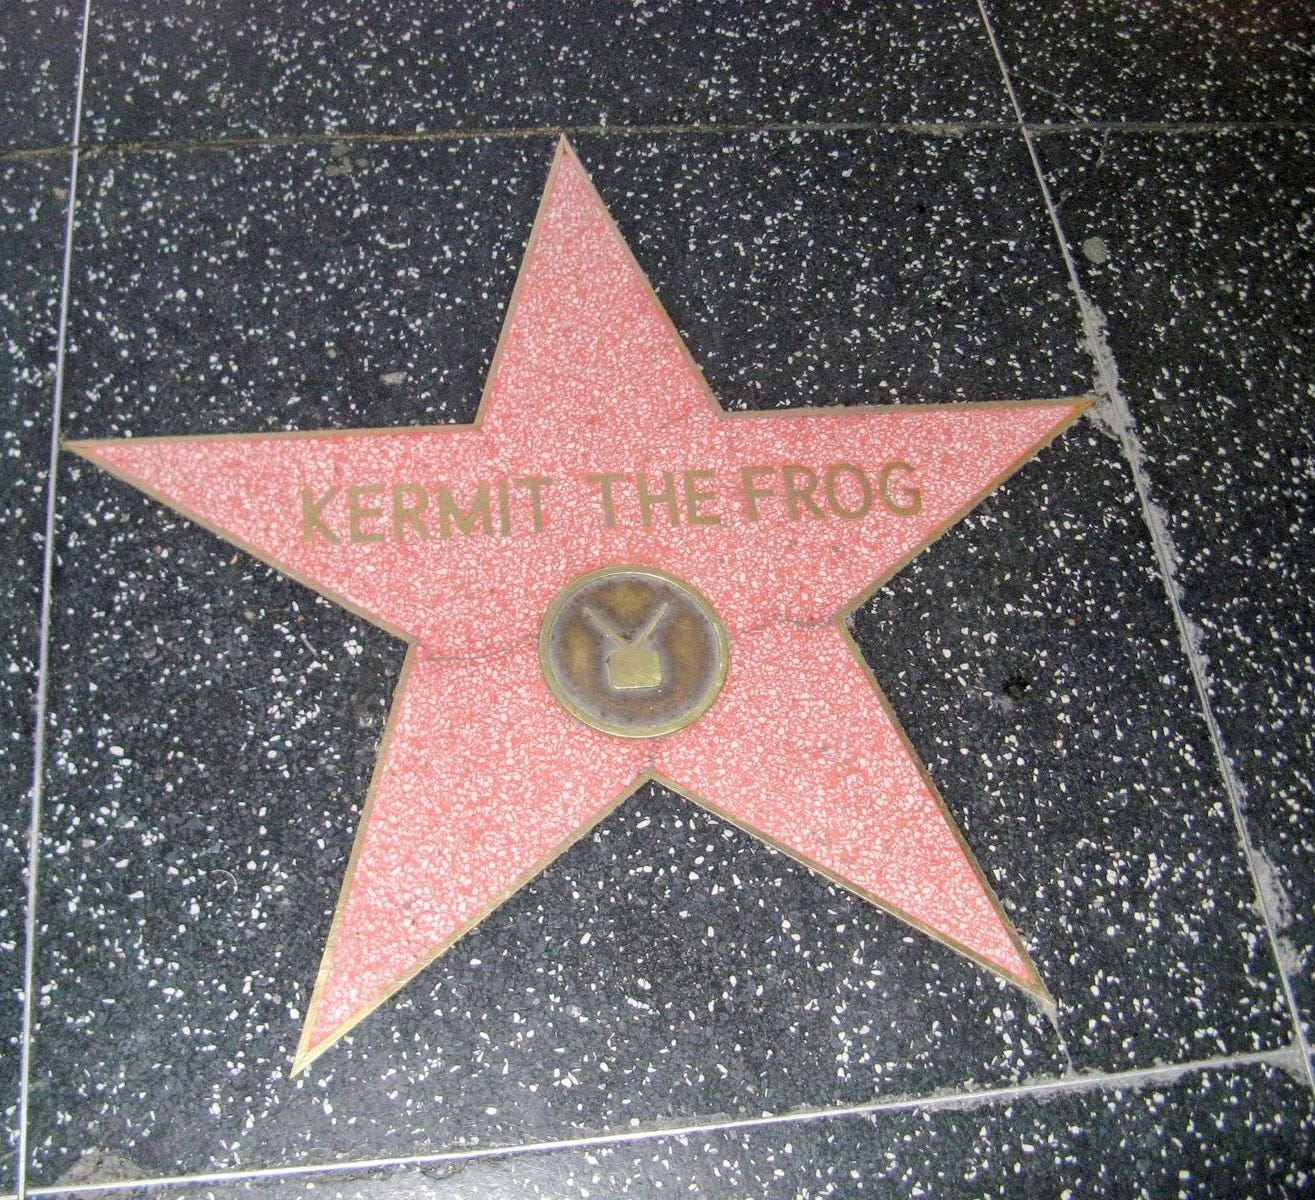 Kermit the Frog star on the Hollywood Walk of Fame